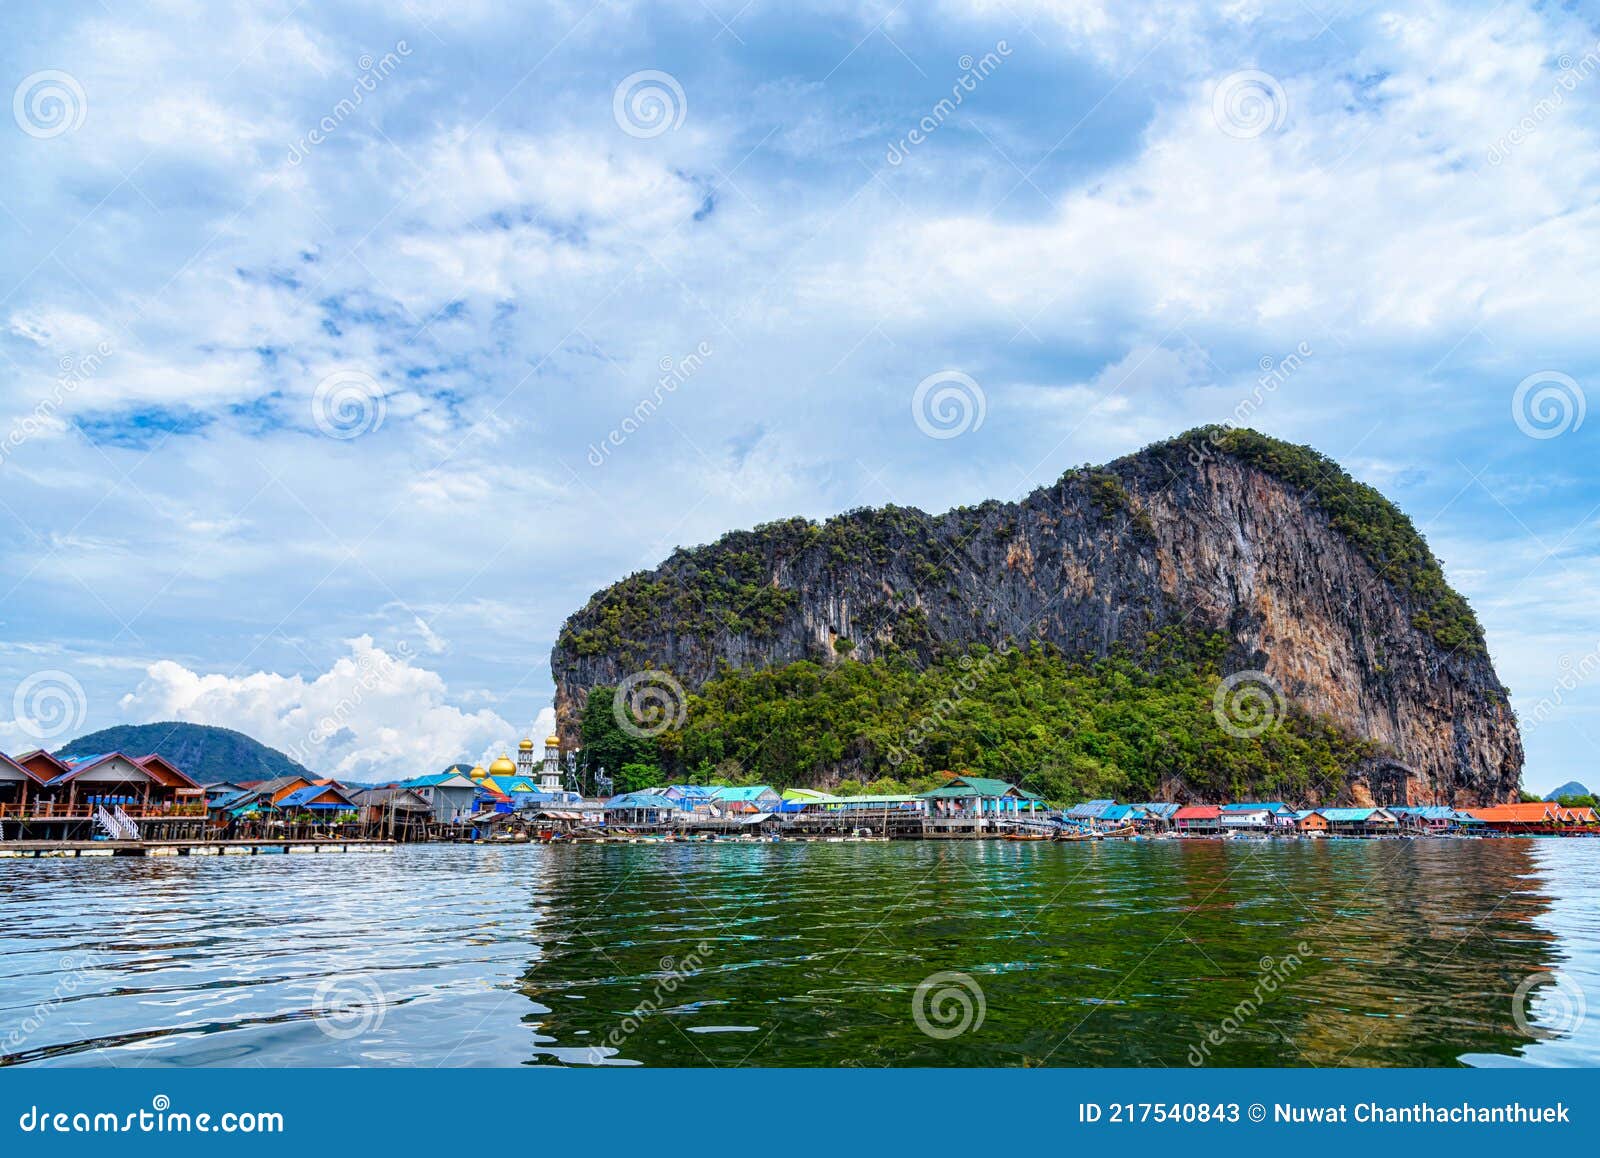 Beautiful Landscape Mosque Sea And Sky In Summer At Punyi, 52% OFF